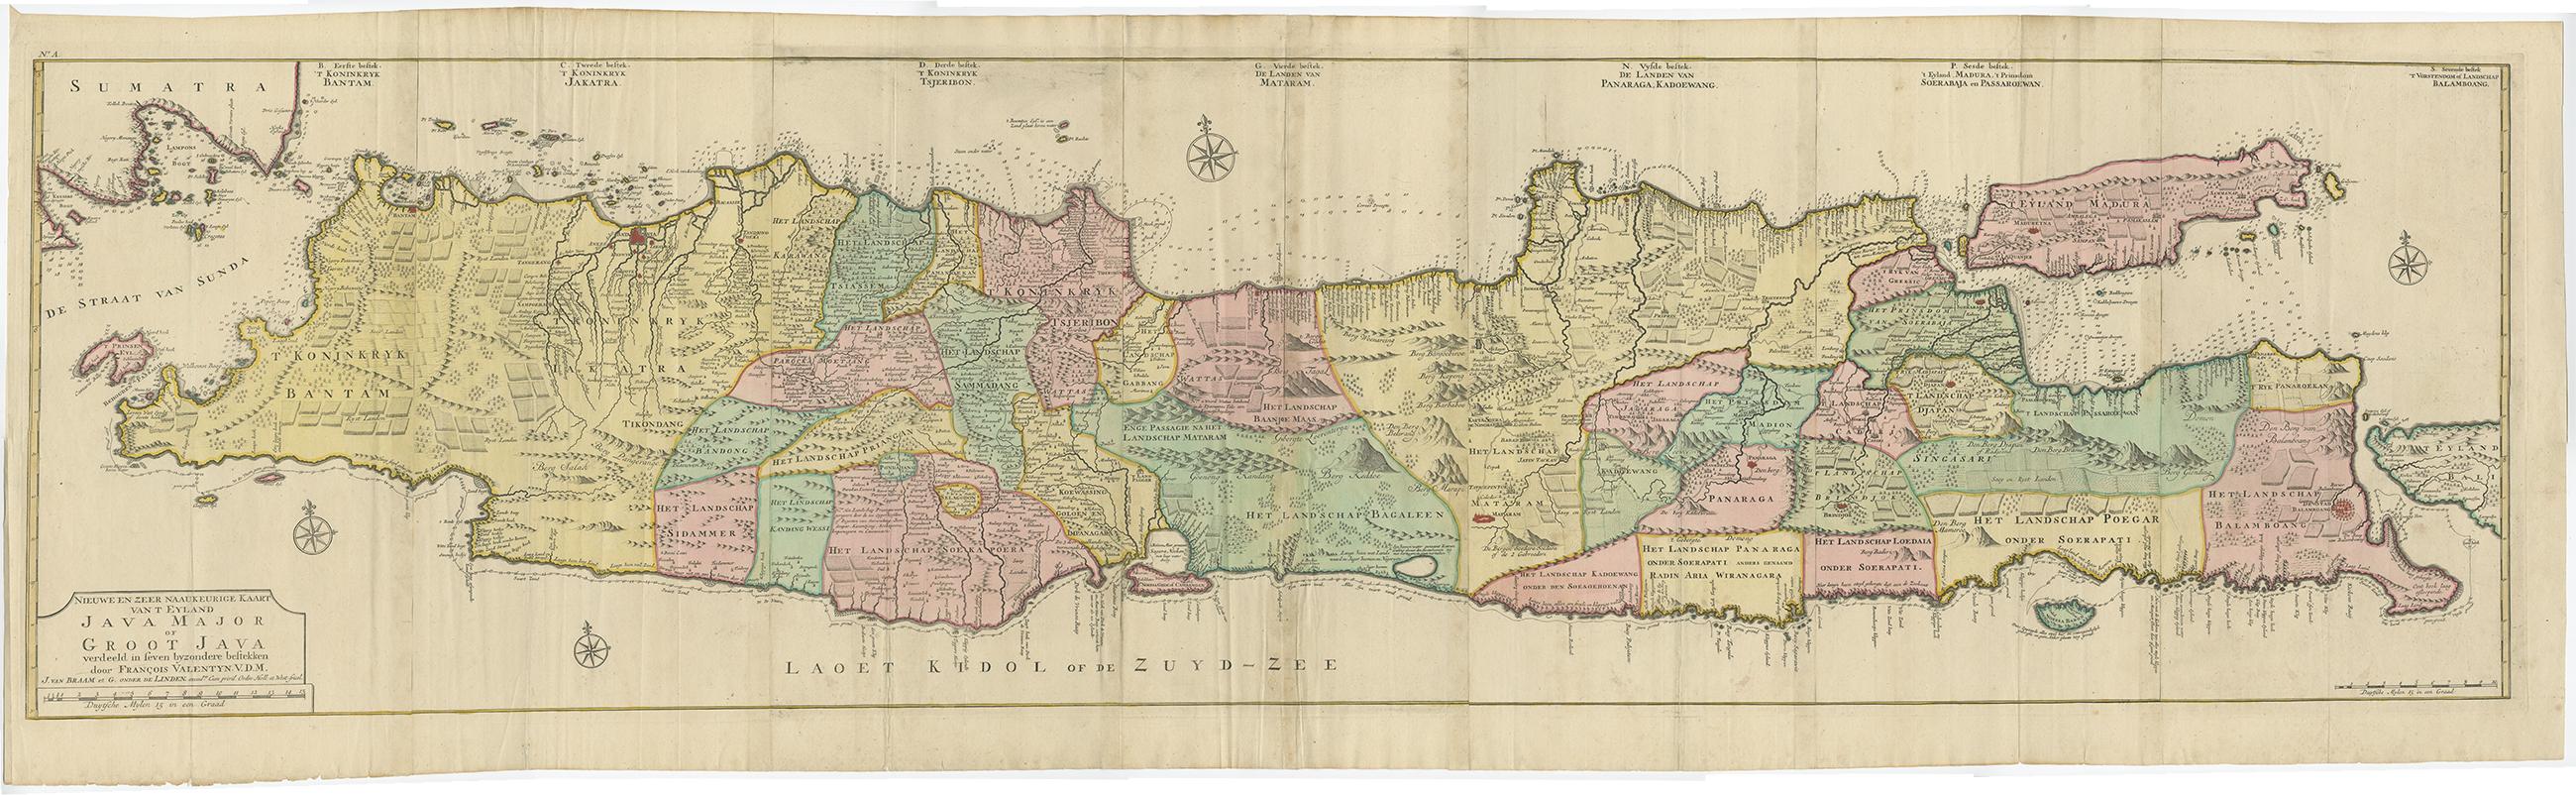 map of java indonesia